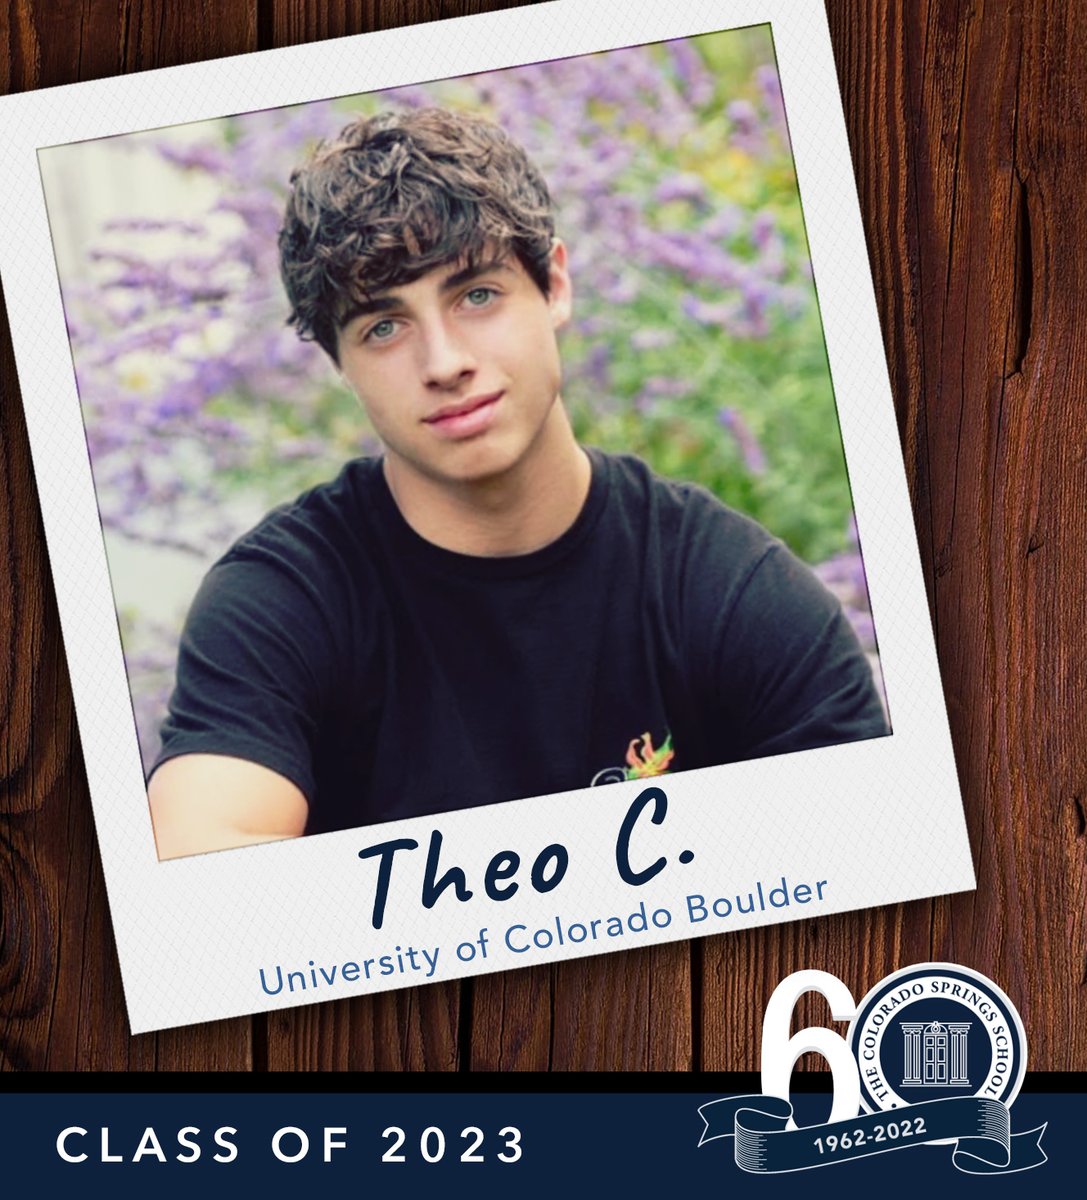 Theo C., your musical talents and ability to think outside the box have led to many memorable conversations with your teachers and classmates. We look forward to seeing where your academic journey takes you. @cuboulder #CSSClassOf2023 #KodiakPride